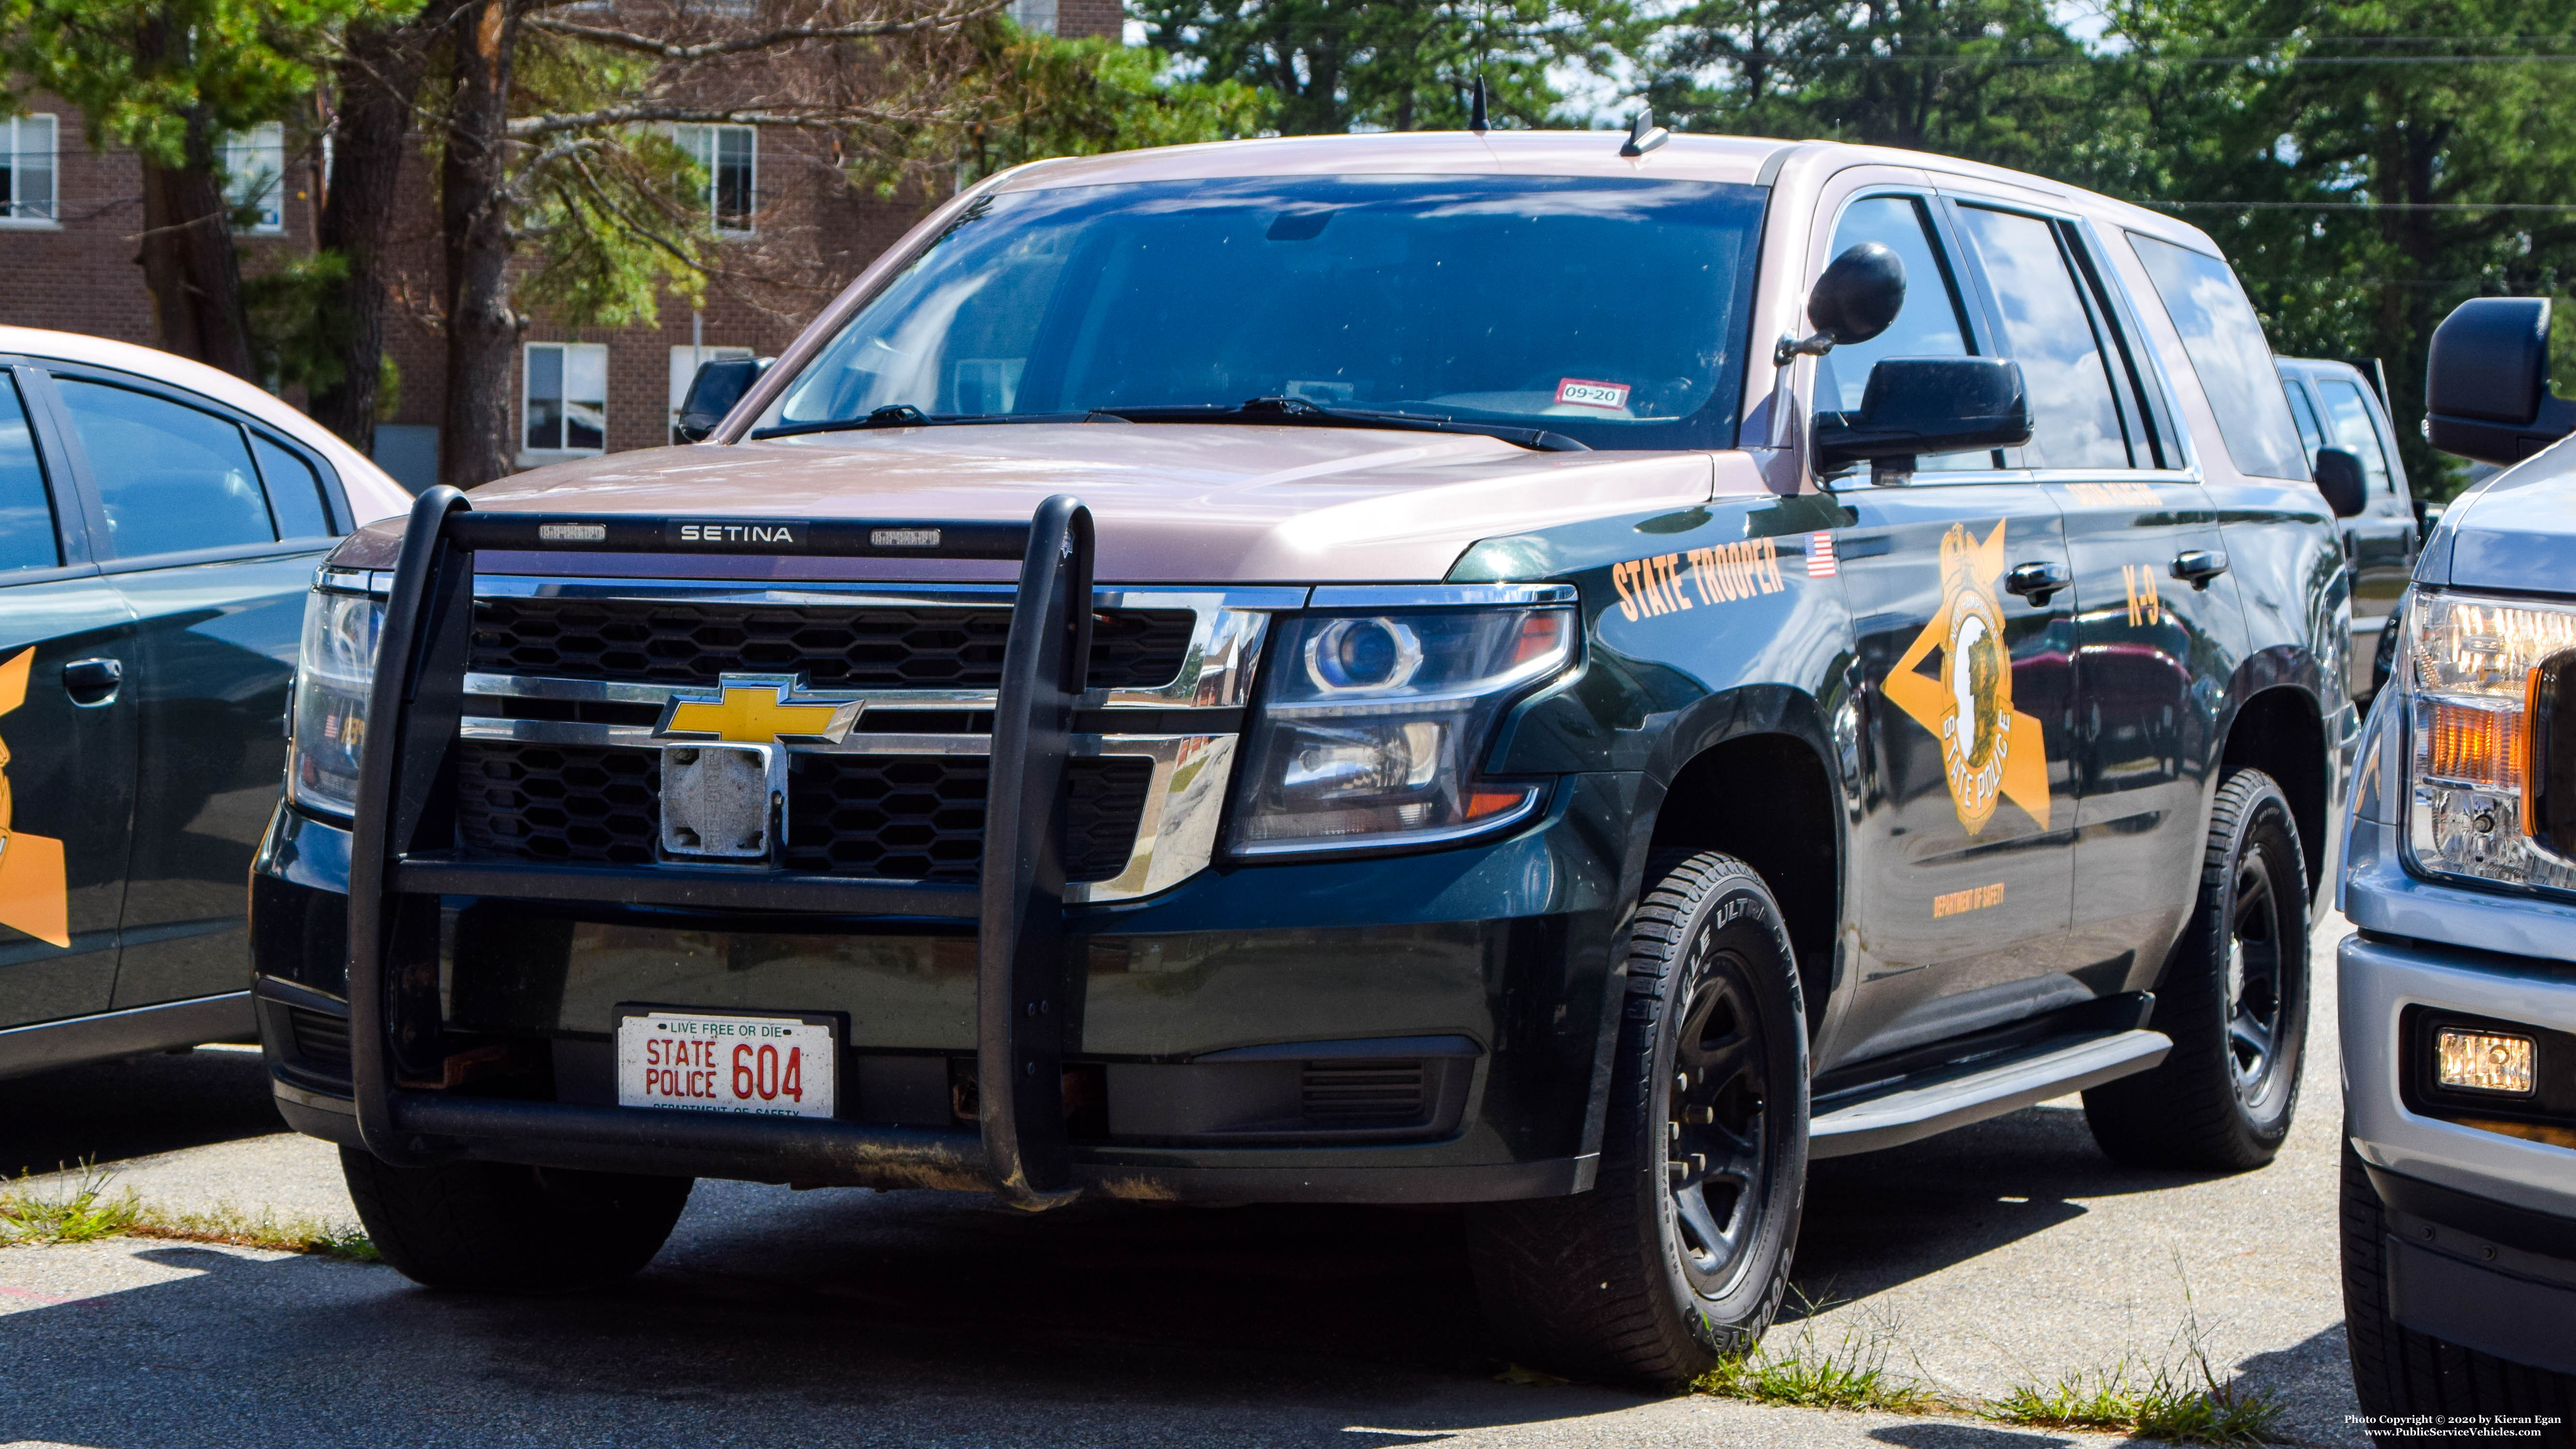 A photo  of New Hampshire State Police
            Cruiser 604, a 2015-2019 Chevrolet Tahoe             taken by Kieran Egan